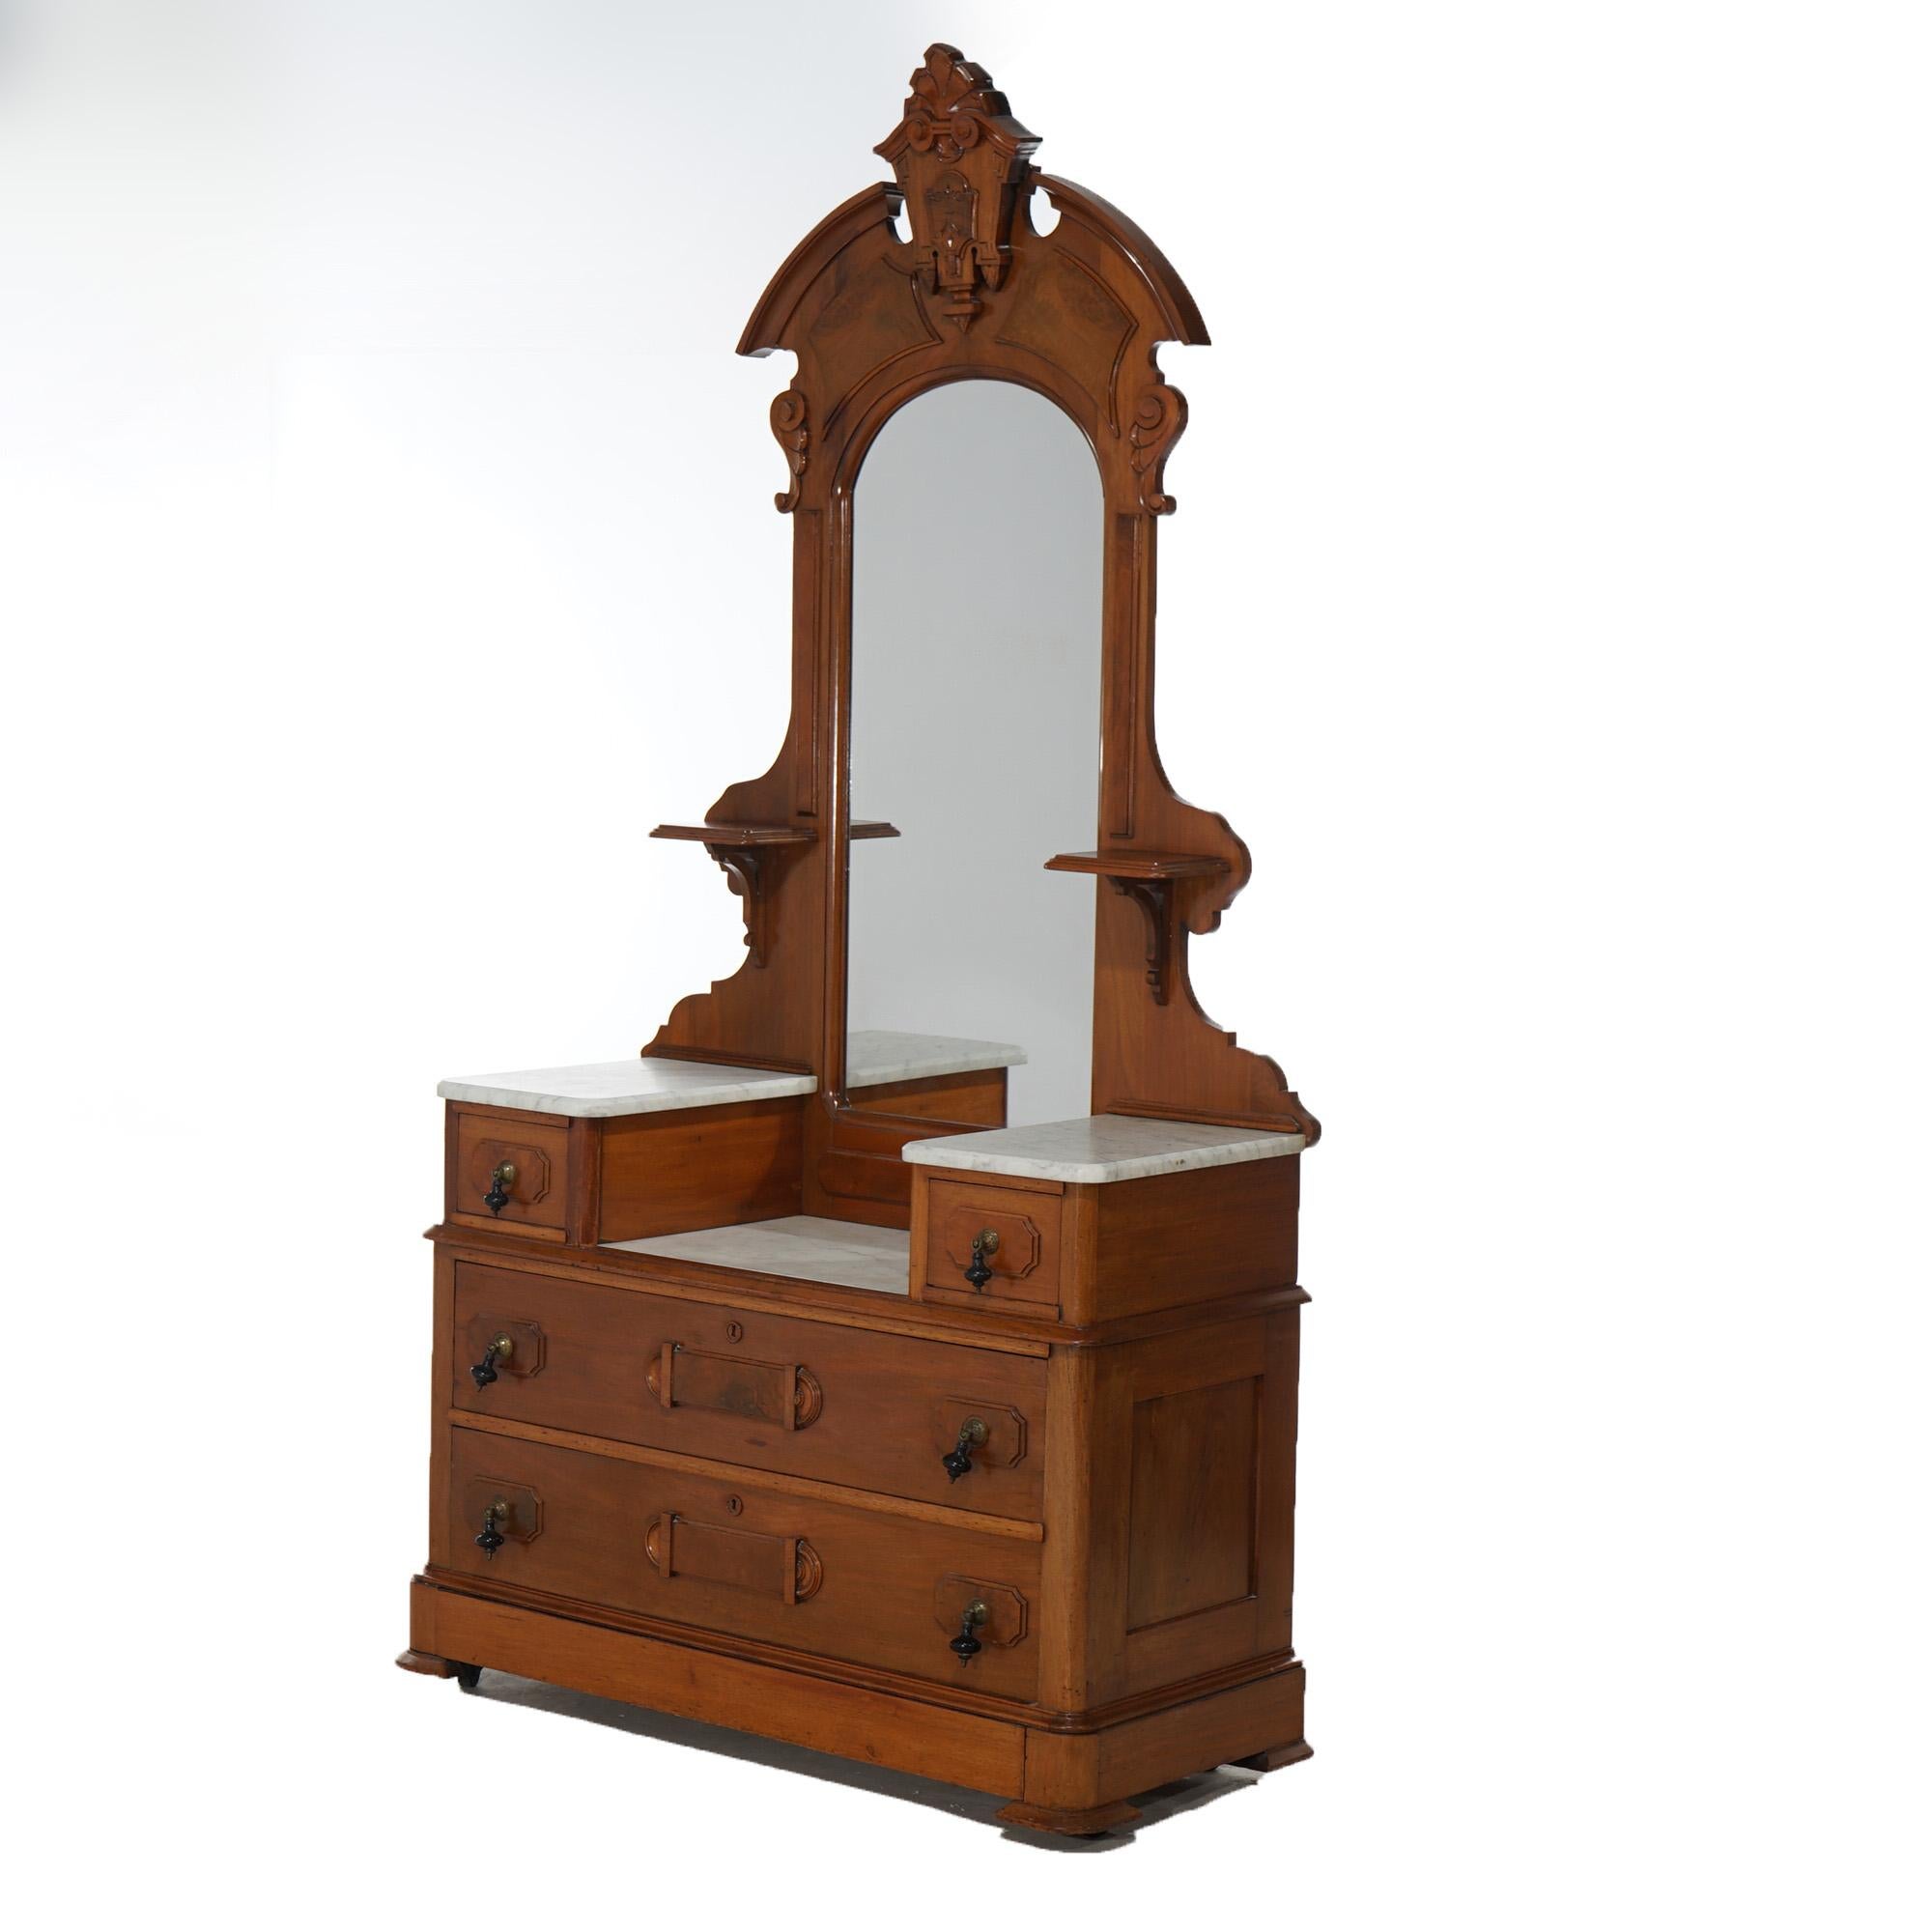 An antique Renaissance Revival drop center dresser offers walnut construction with mirror having carved shield form cartouche over drop center case with marble tops, raised panel drawers, and tear drop pulls, c1890

Measures- 87''H x 45''W x 20''D